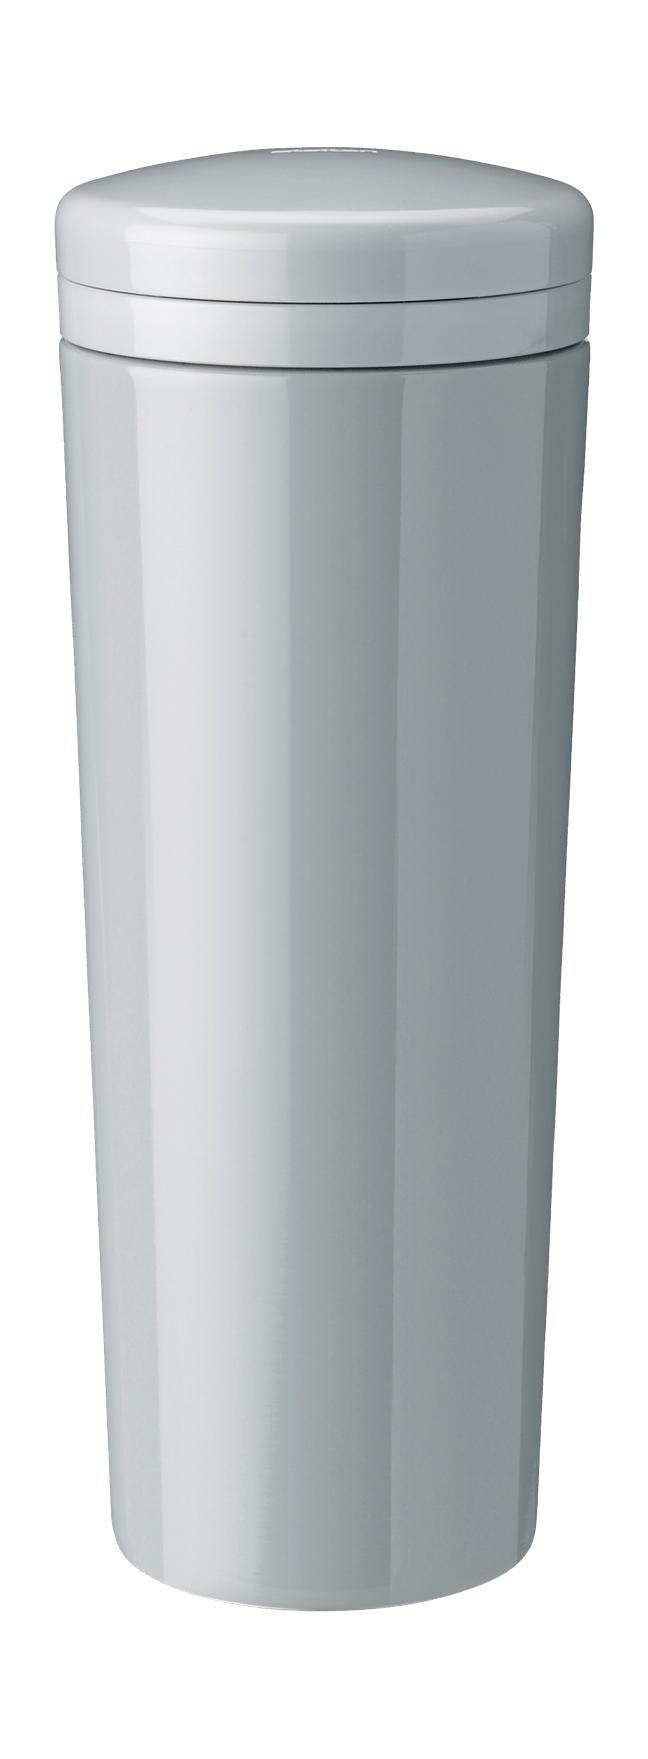 Stelton Carrie Thermosflasche 0,5 L, Hellgrau